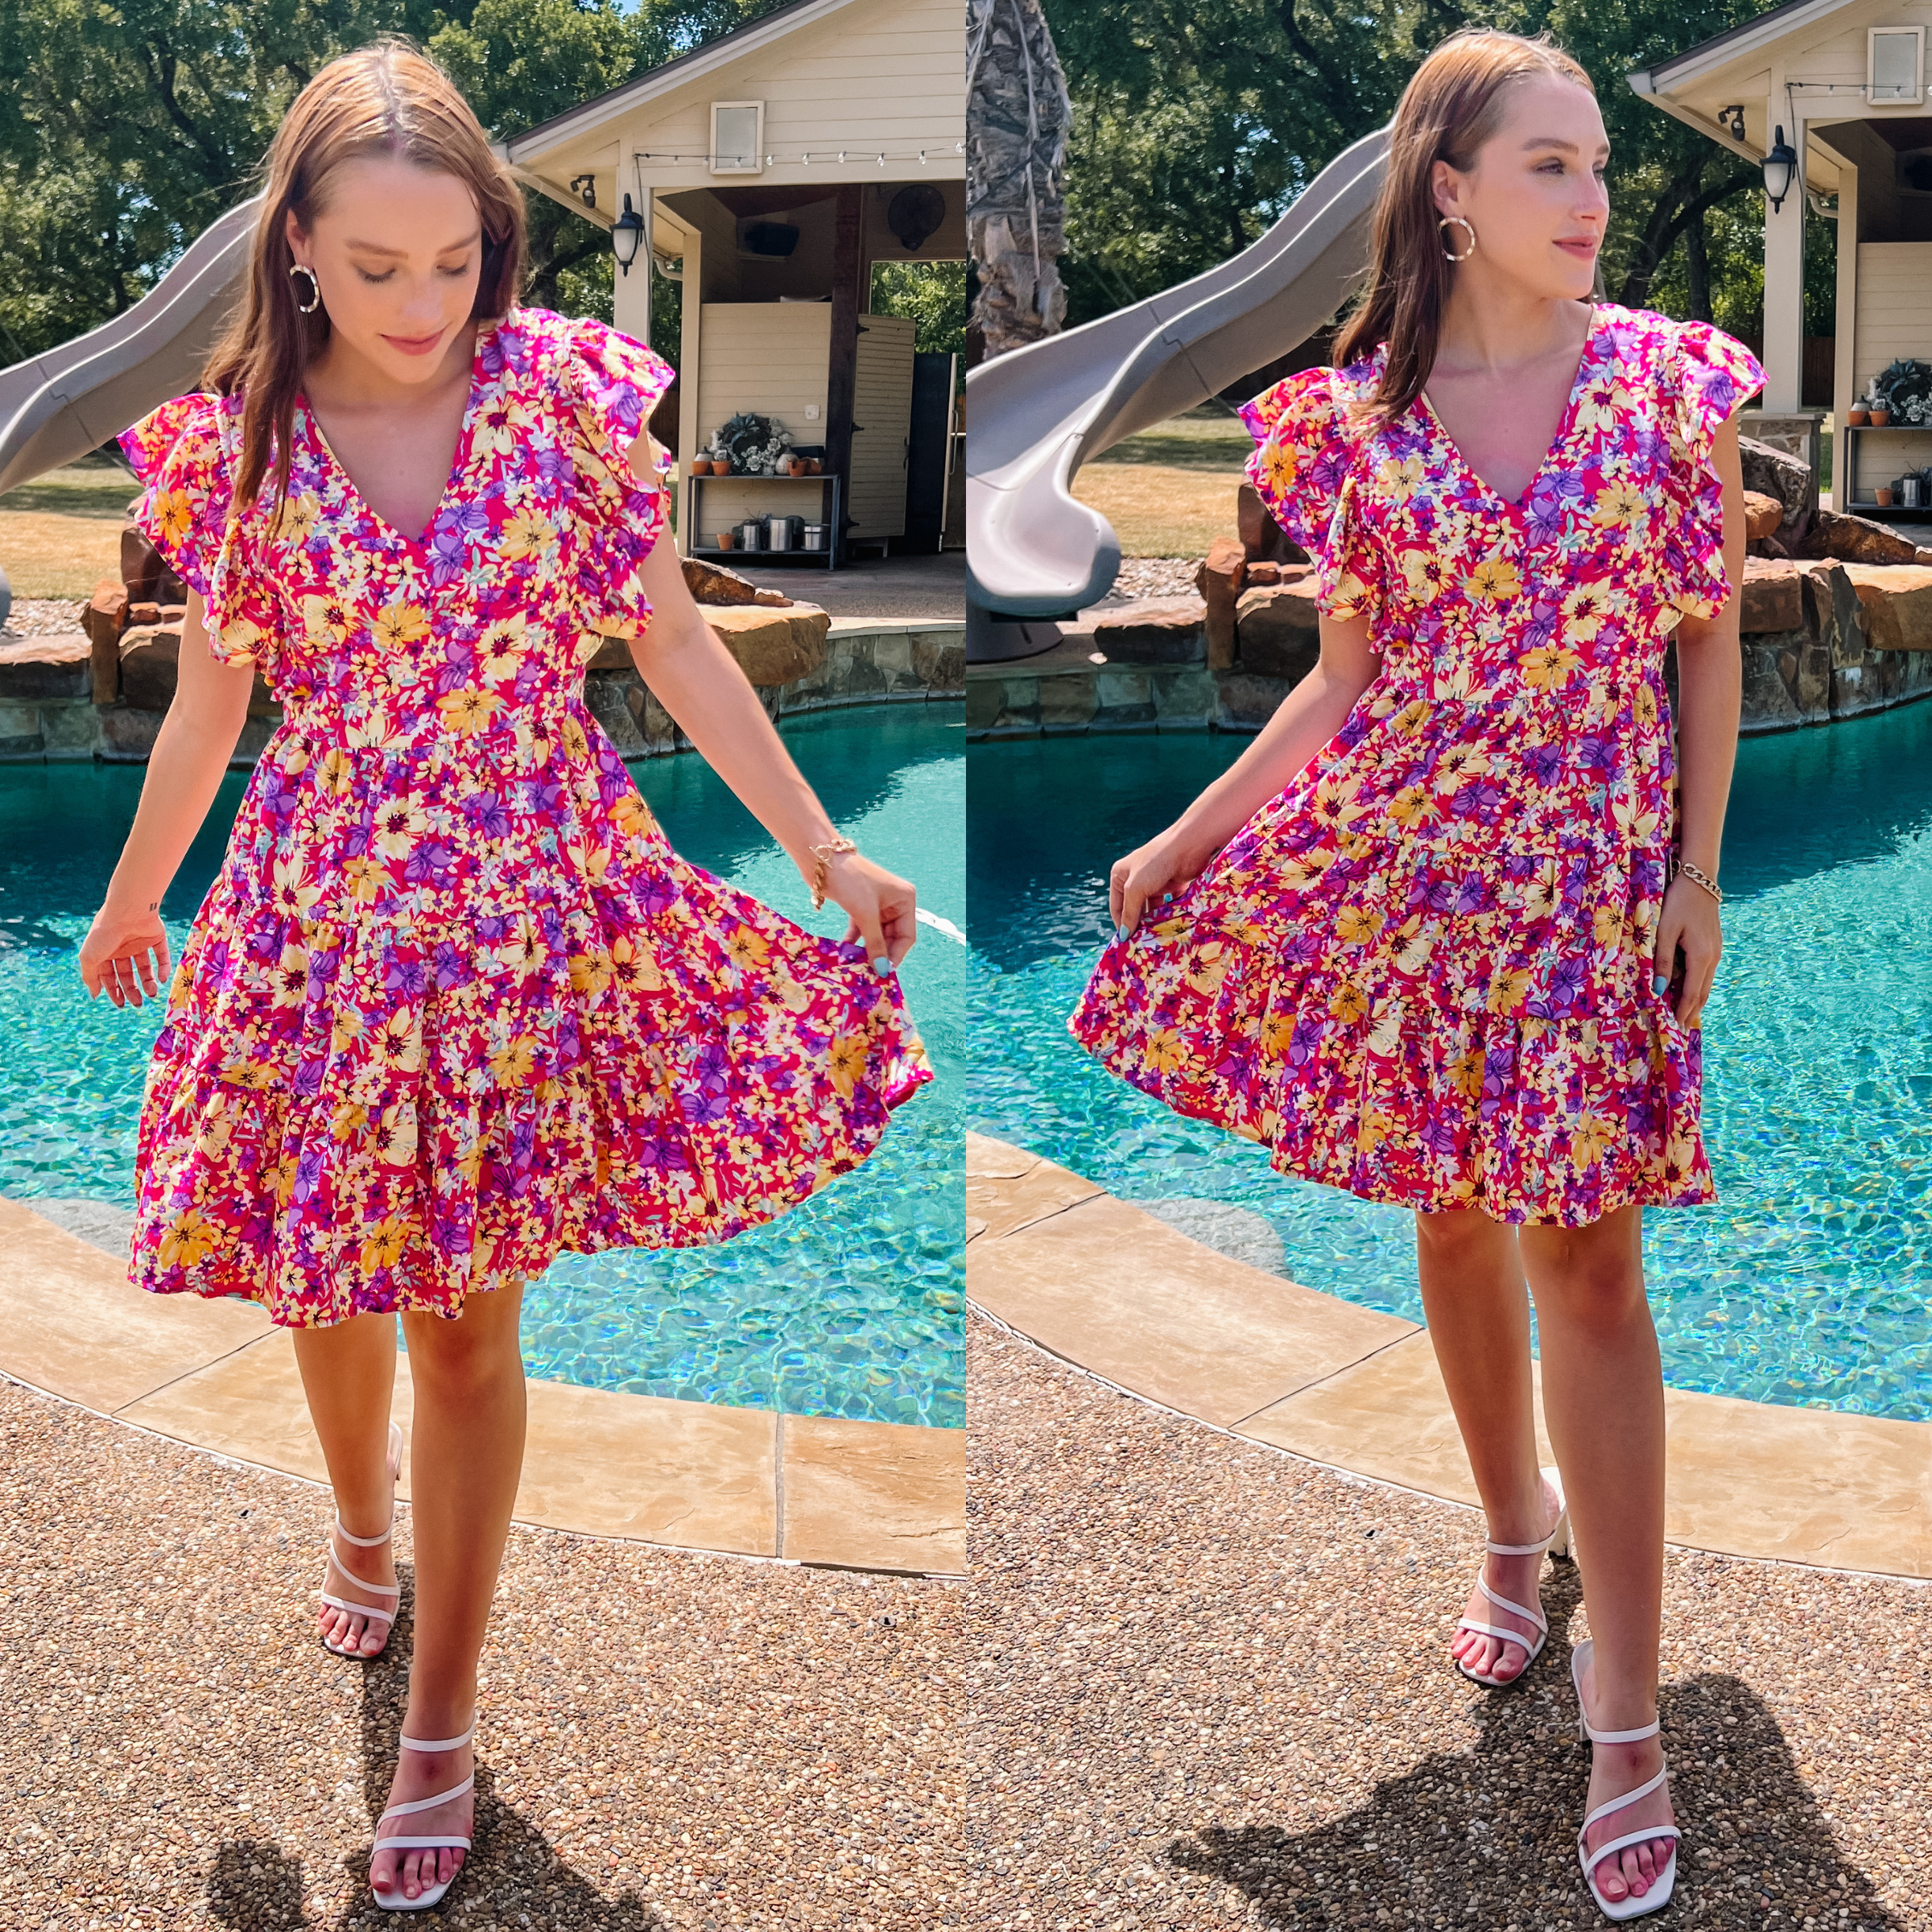 Blooming Beauty Floral V Neck Dress with Ruffle Cap Sleeves in Pink - Giddy Up Glamour Boutique